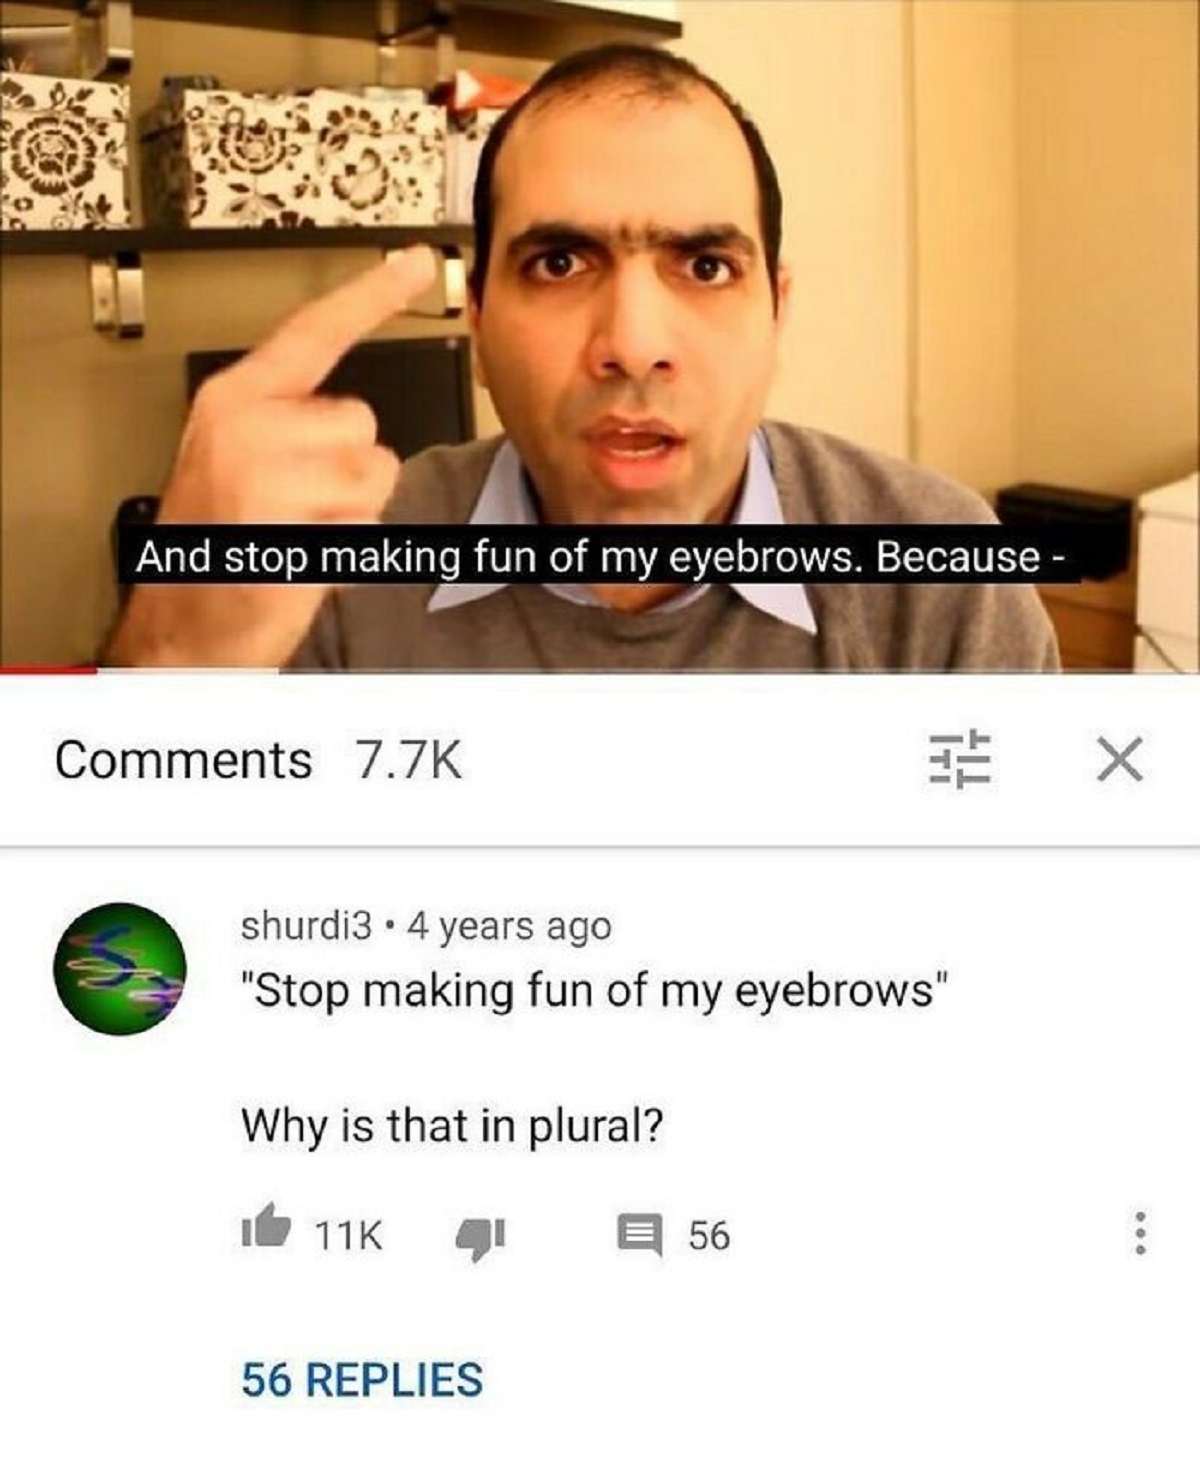 funny youtube comments - And stop making fun of my eyebrows. Because shurdi3 4 years ago "Stop making fun of my eyebrows" Why is that in plural? 11K 56 Replies 56 600 X